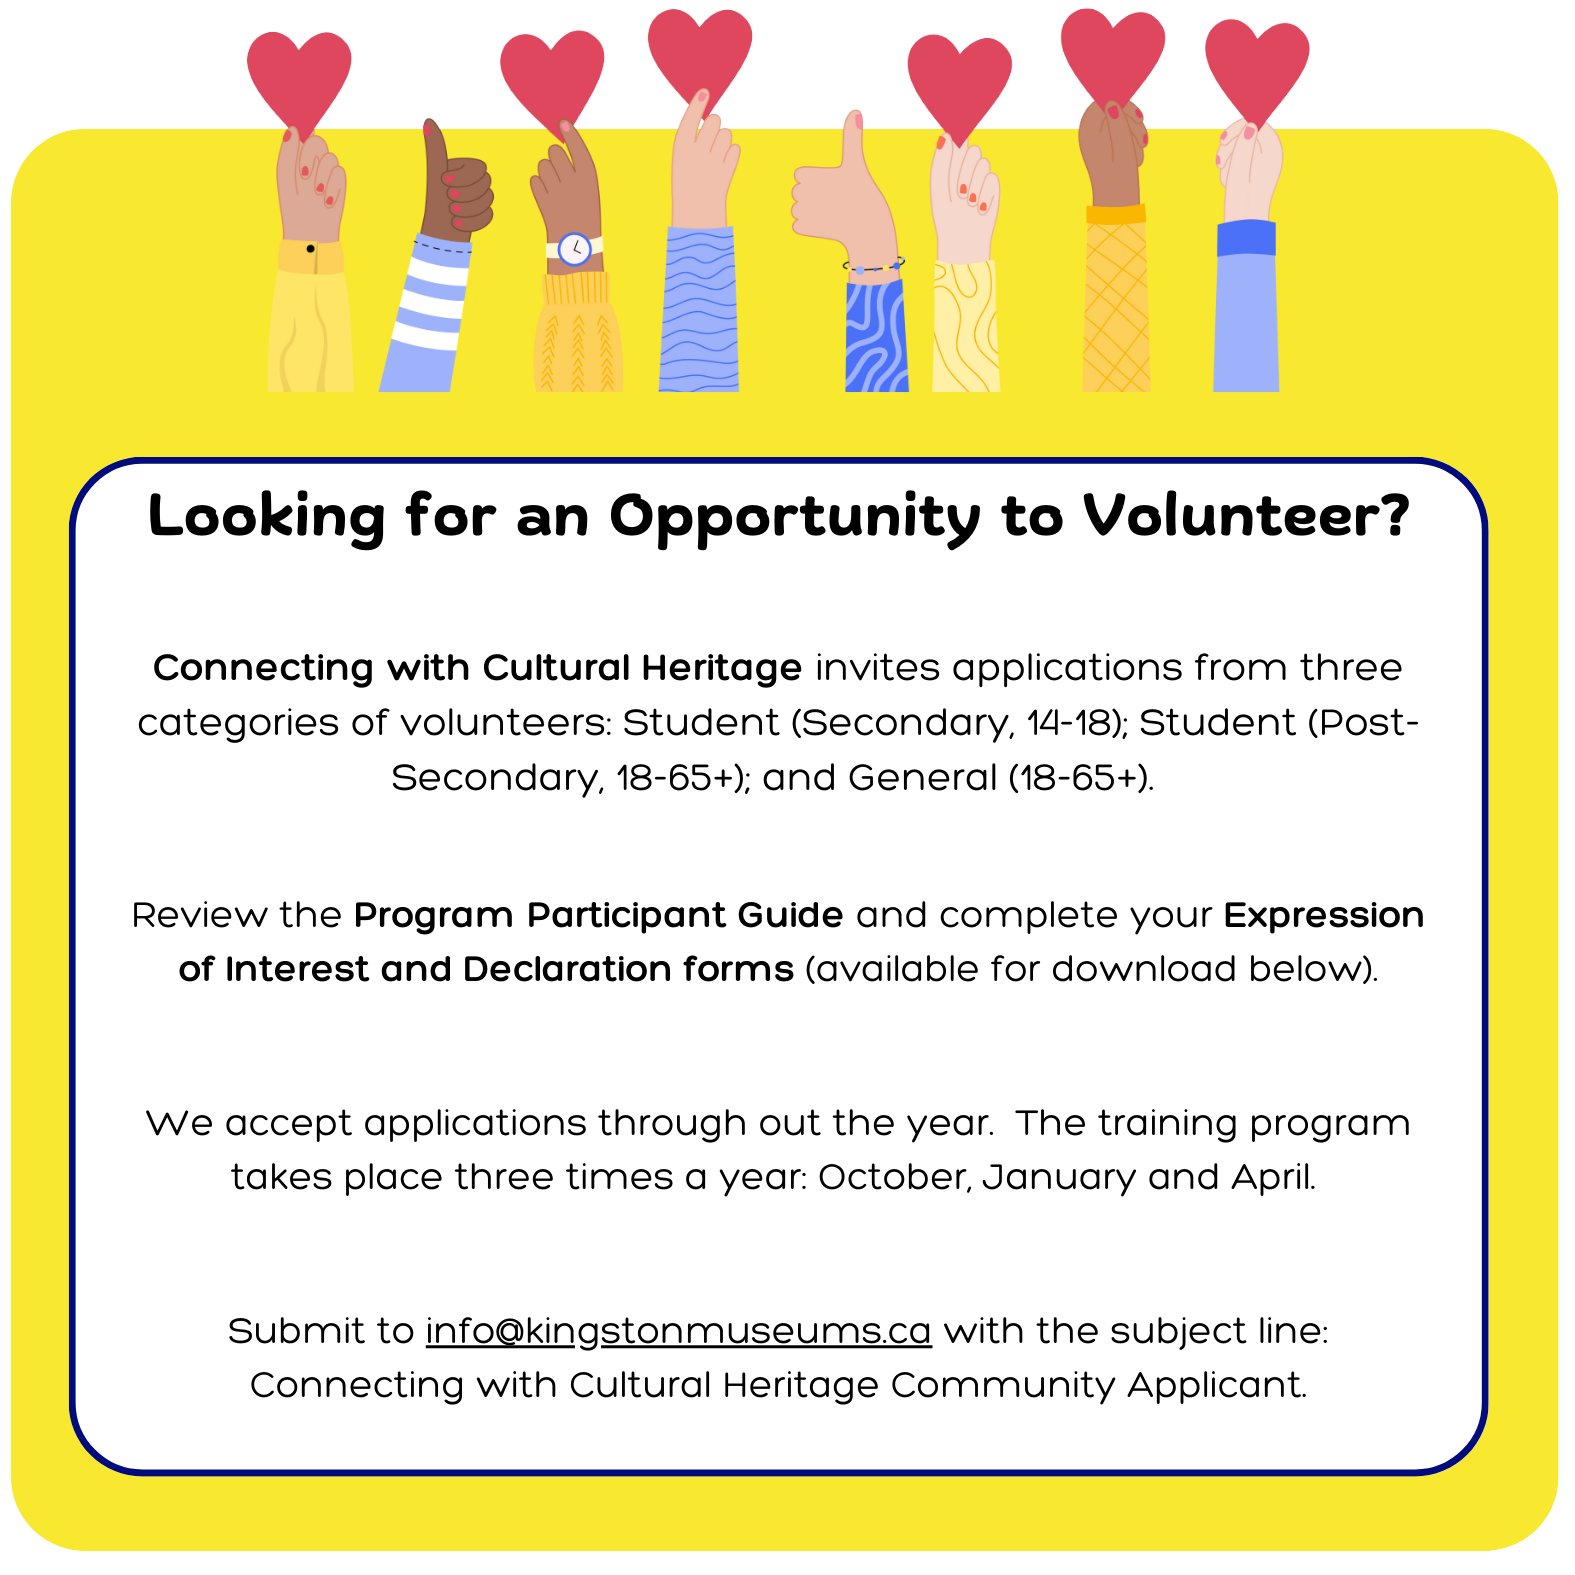 Connecting with Cultural Heritage invites applications from three categories of volunteers: Student (Secondary, 14-18); Student (Post-Secondary, 18-65+); and General (18-65+).    Review the Program Participant Guide and complete your Expression of Interest and Declaration forms (available for download below).   We accept applications through out the year.  The training program takes place three times a year: October, January and April.    Submit to info@kingstonmuseums.ca with the subject line: Connecting with Cultural Heritage Community Applicant.